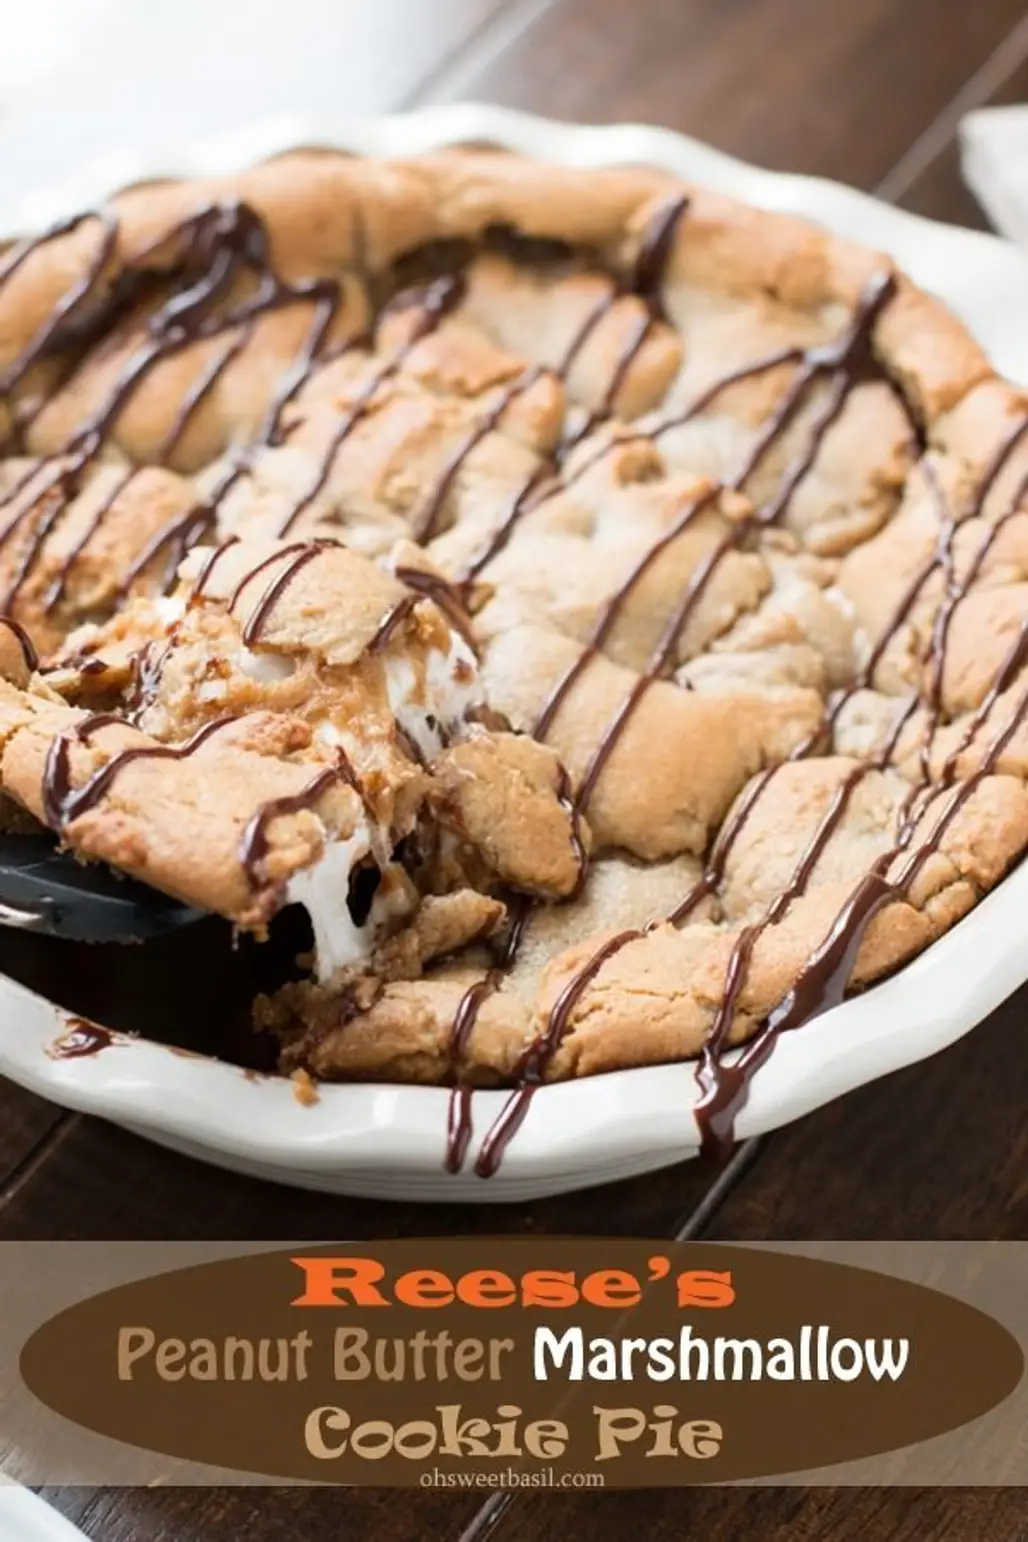 Reese's Peanut Butter Marshmallow Cookie Pie